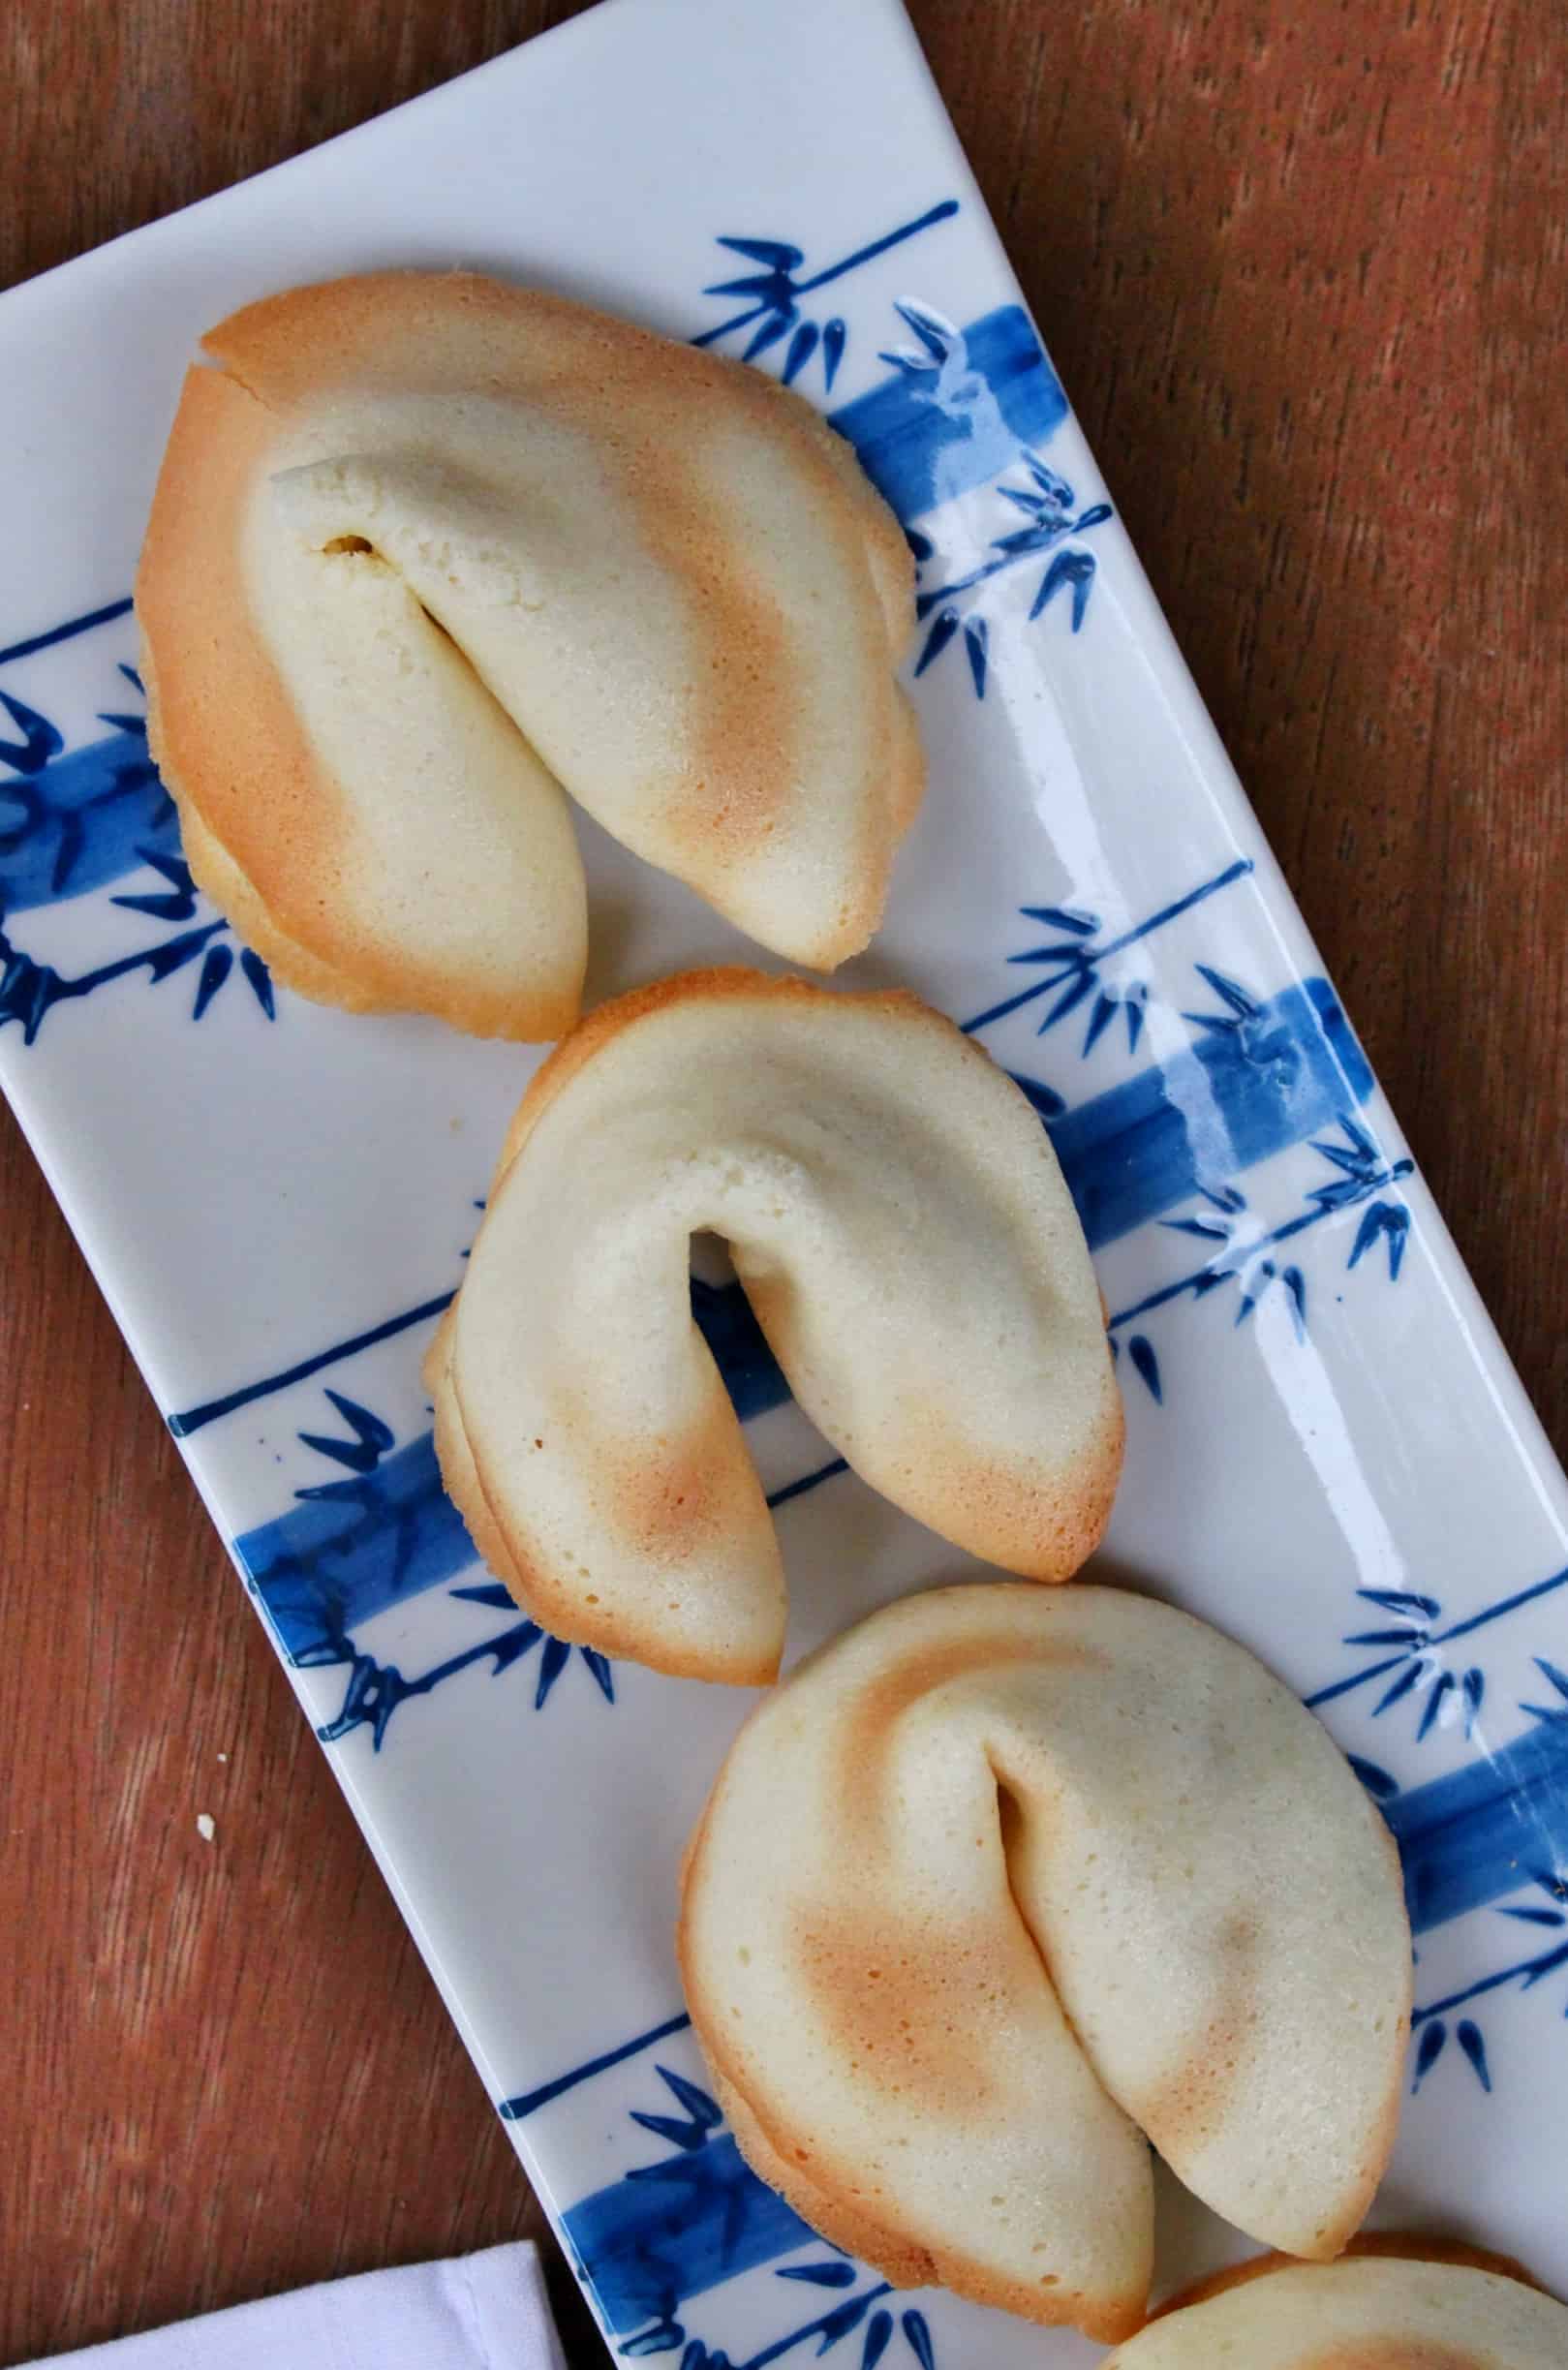 Homemade Fortune Cookies - Chinese Fortune Cookies